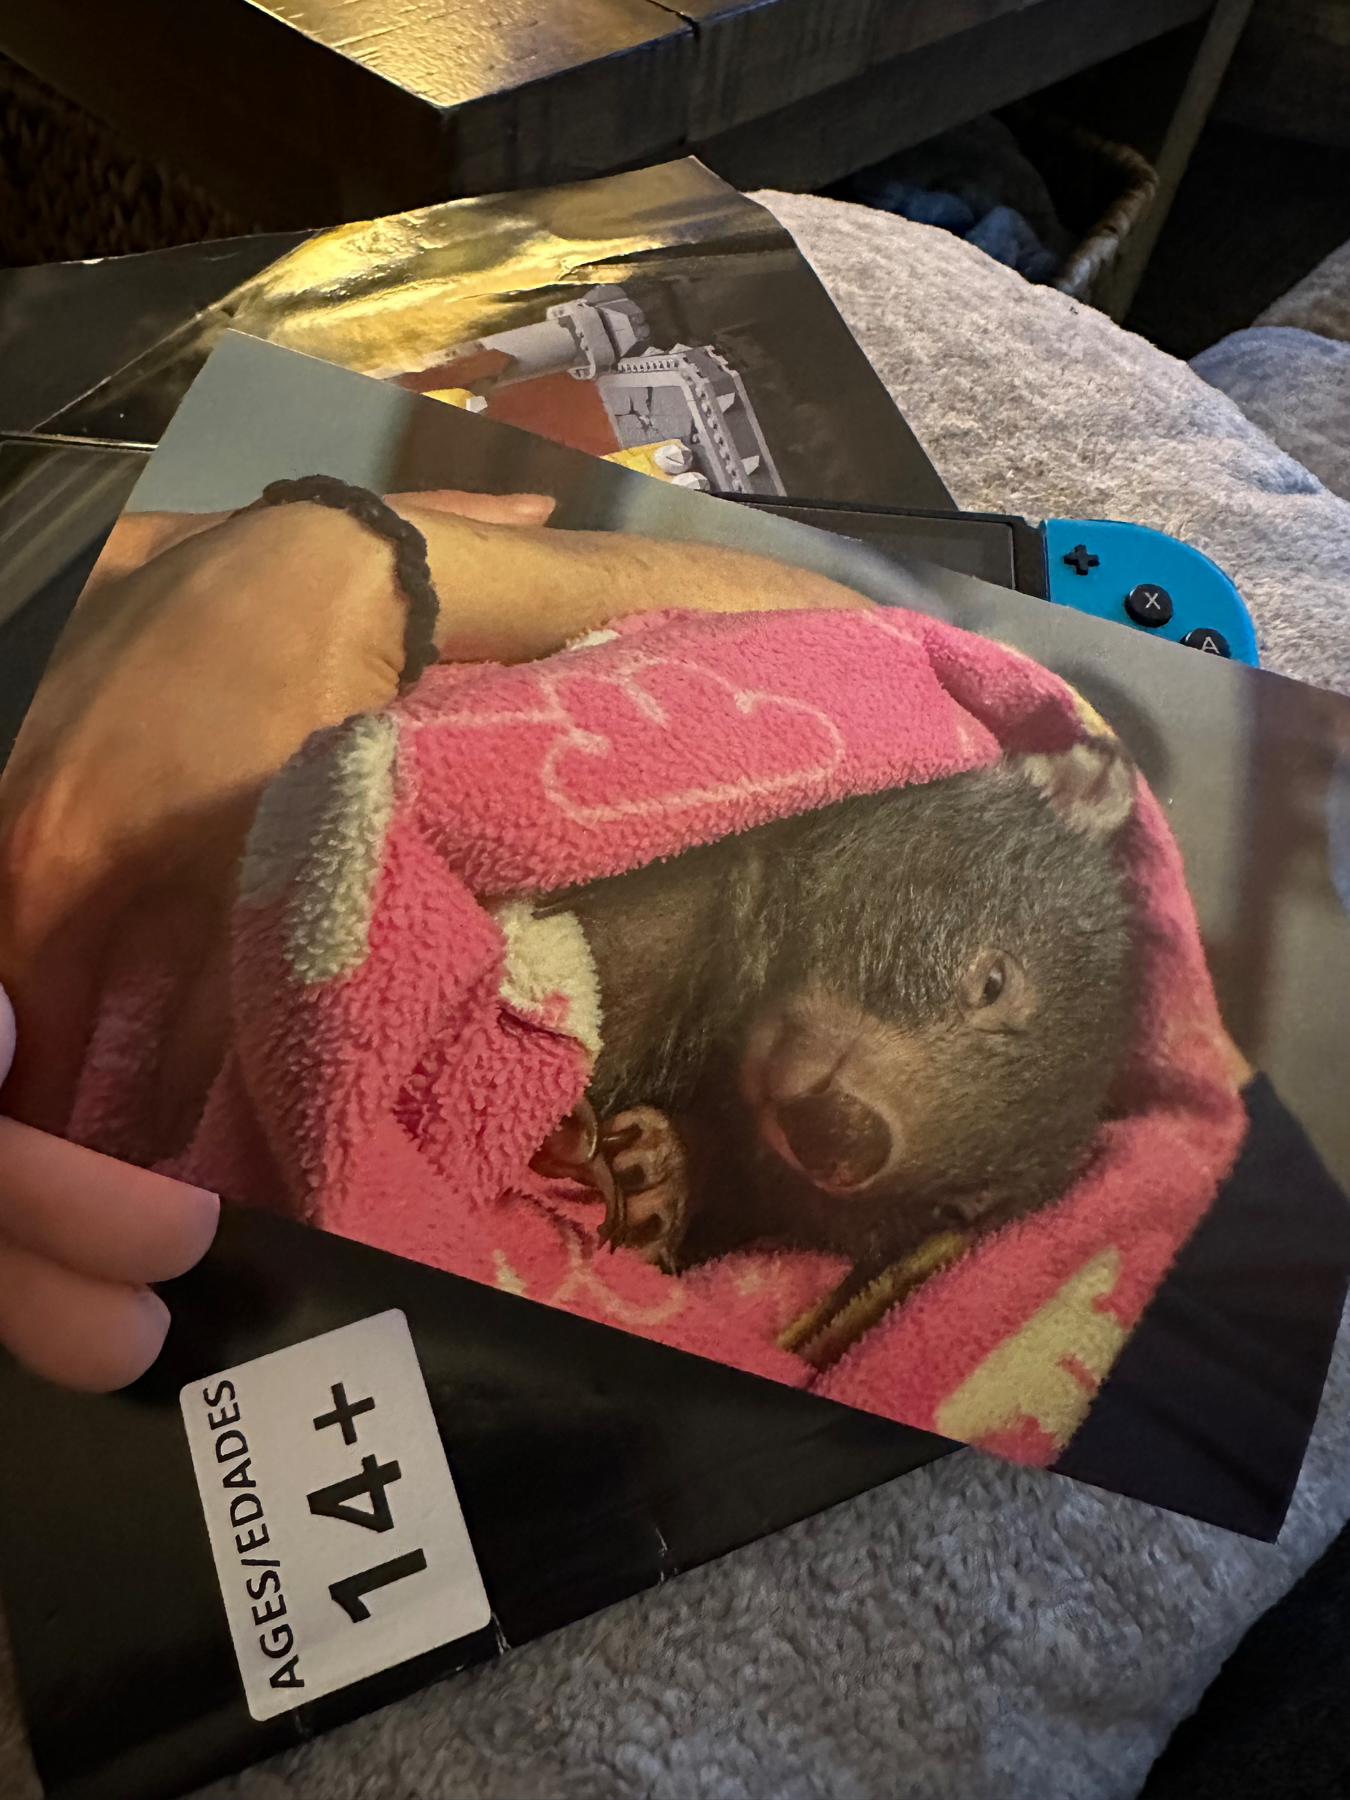 A photo of a wombat wrapped in a pink towel held in a person’s arm